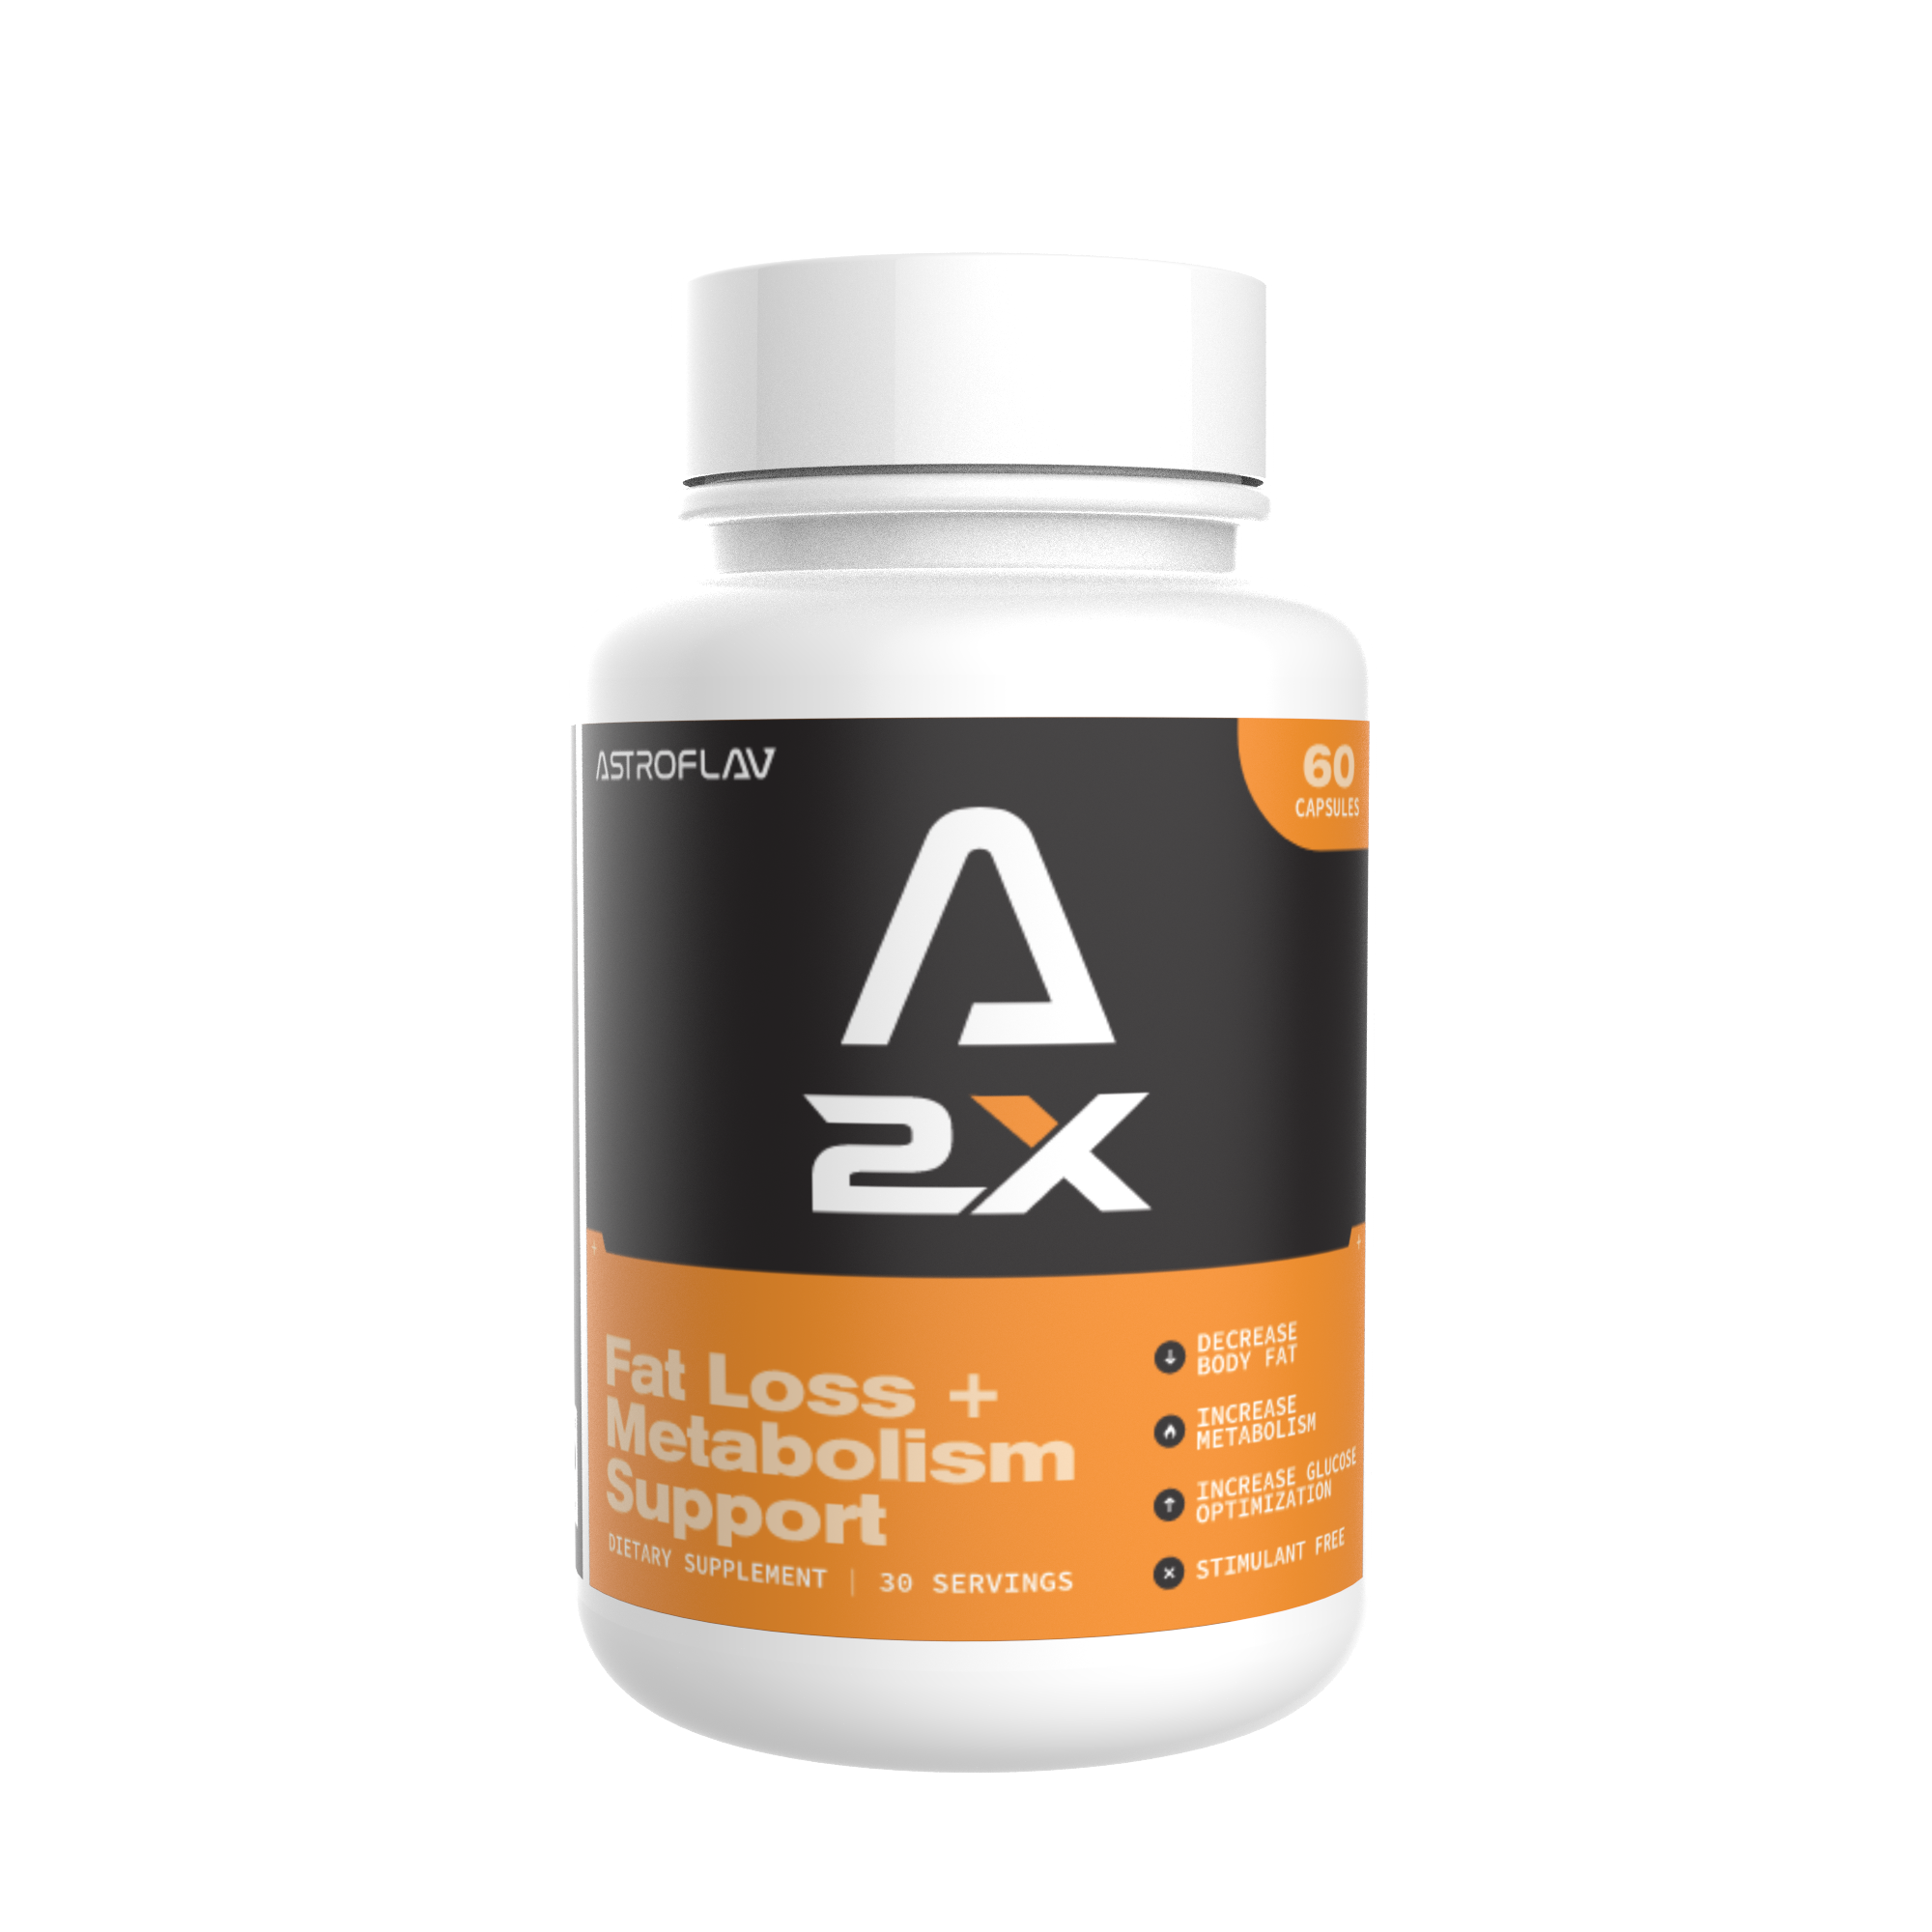 FREE 2X: Fat Loss + Metabolism Support